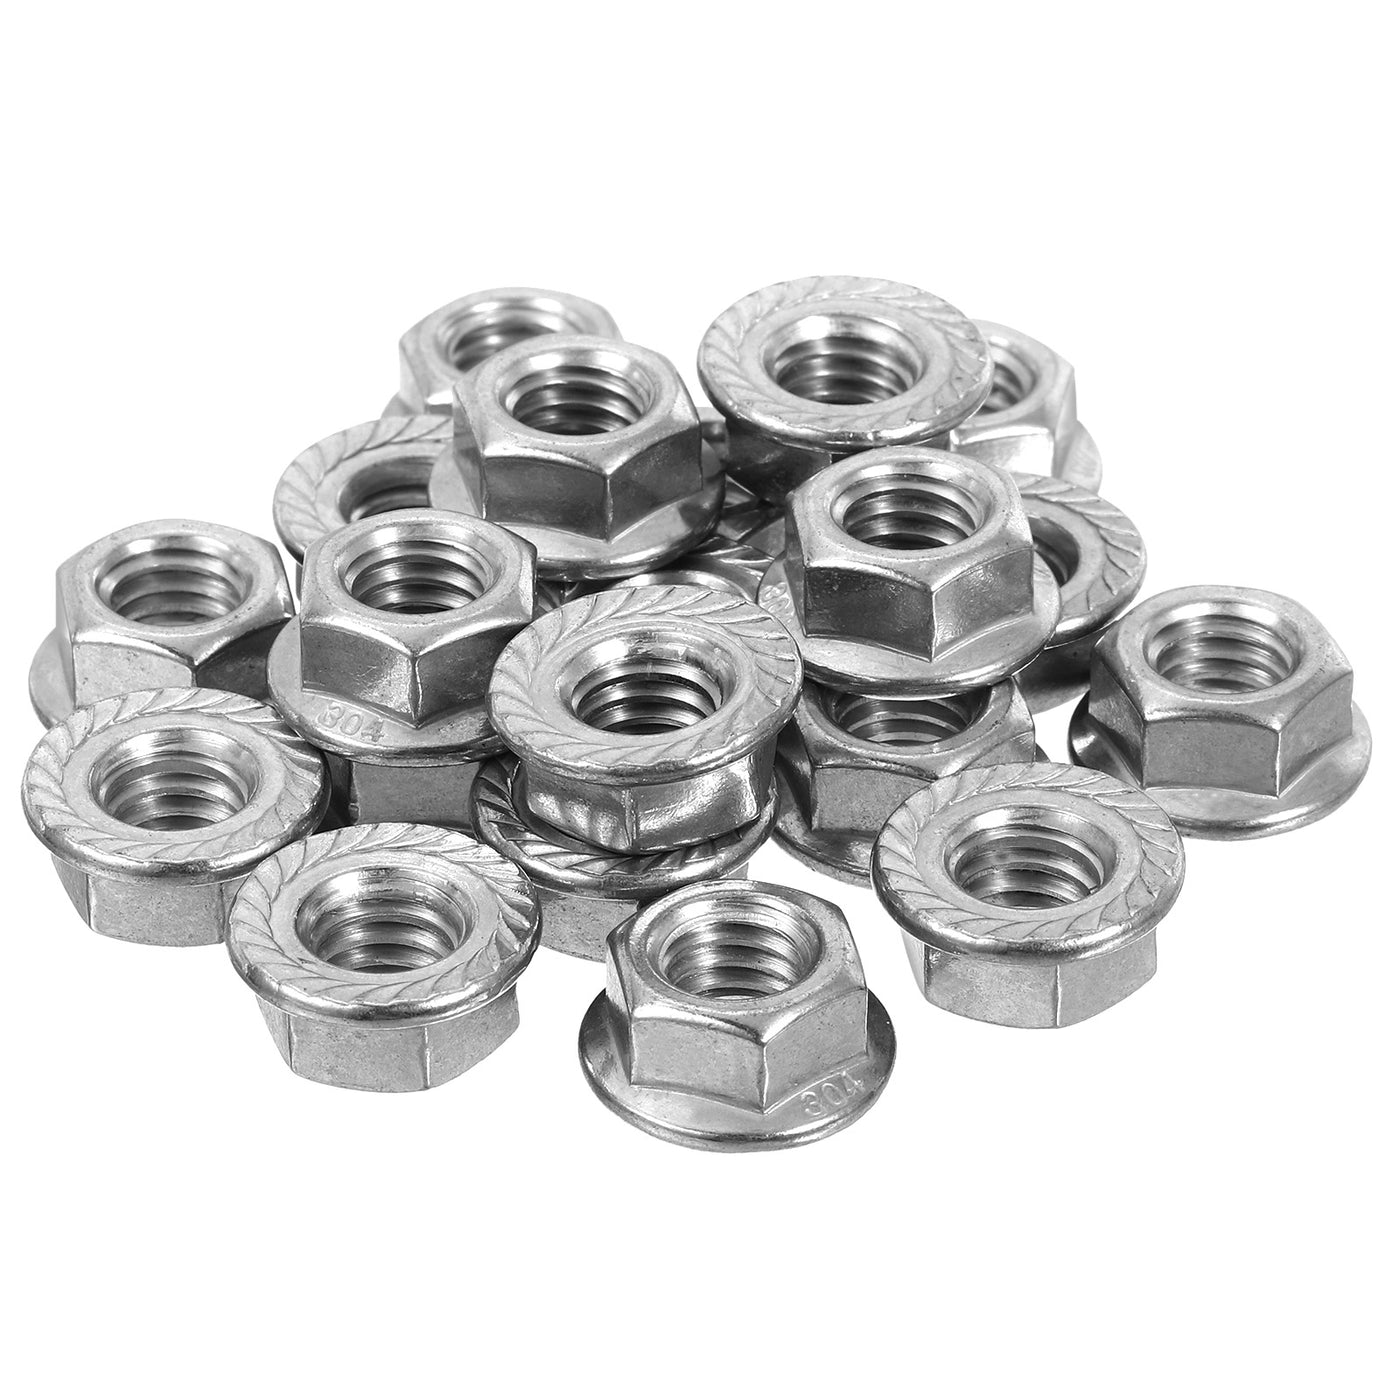 uxcell Uxcell 3/8-16 Serrated Flange Hex Lock Nuts, 25Pcs Hexagon Flange Nut, Silver